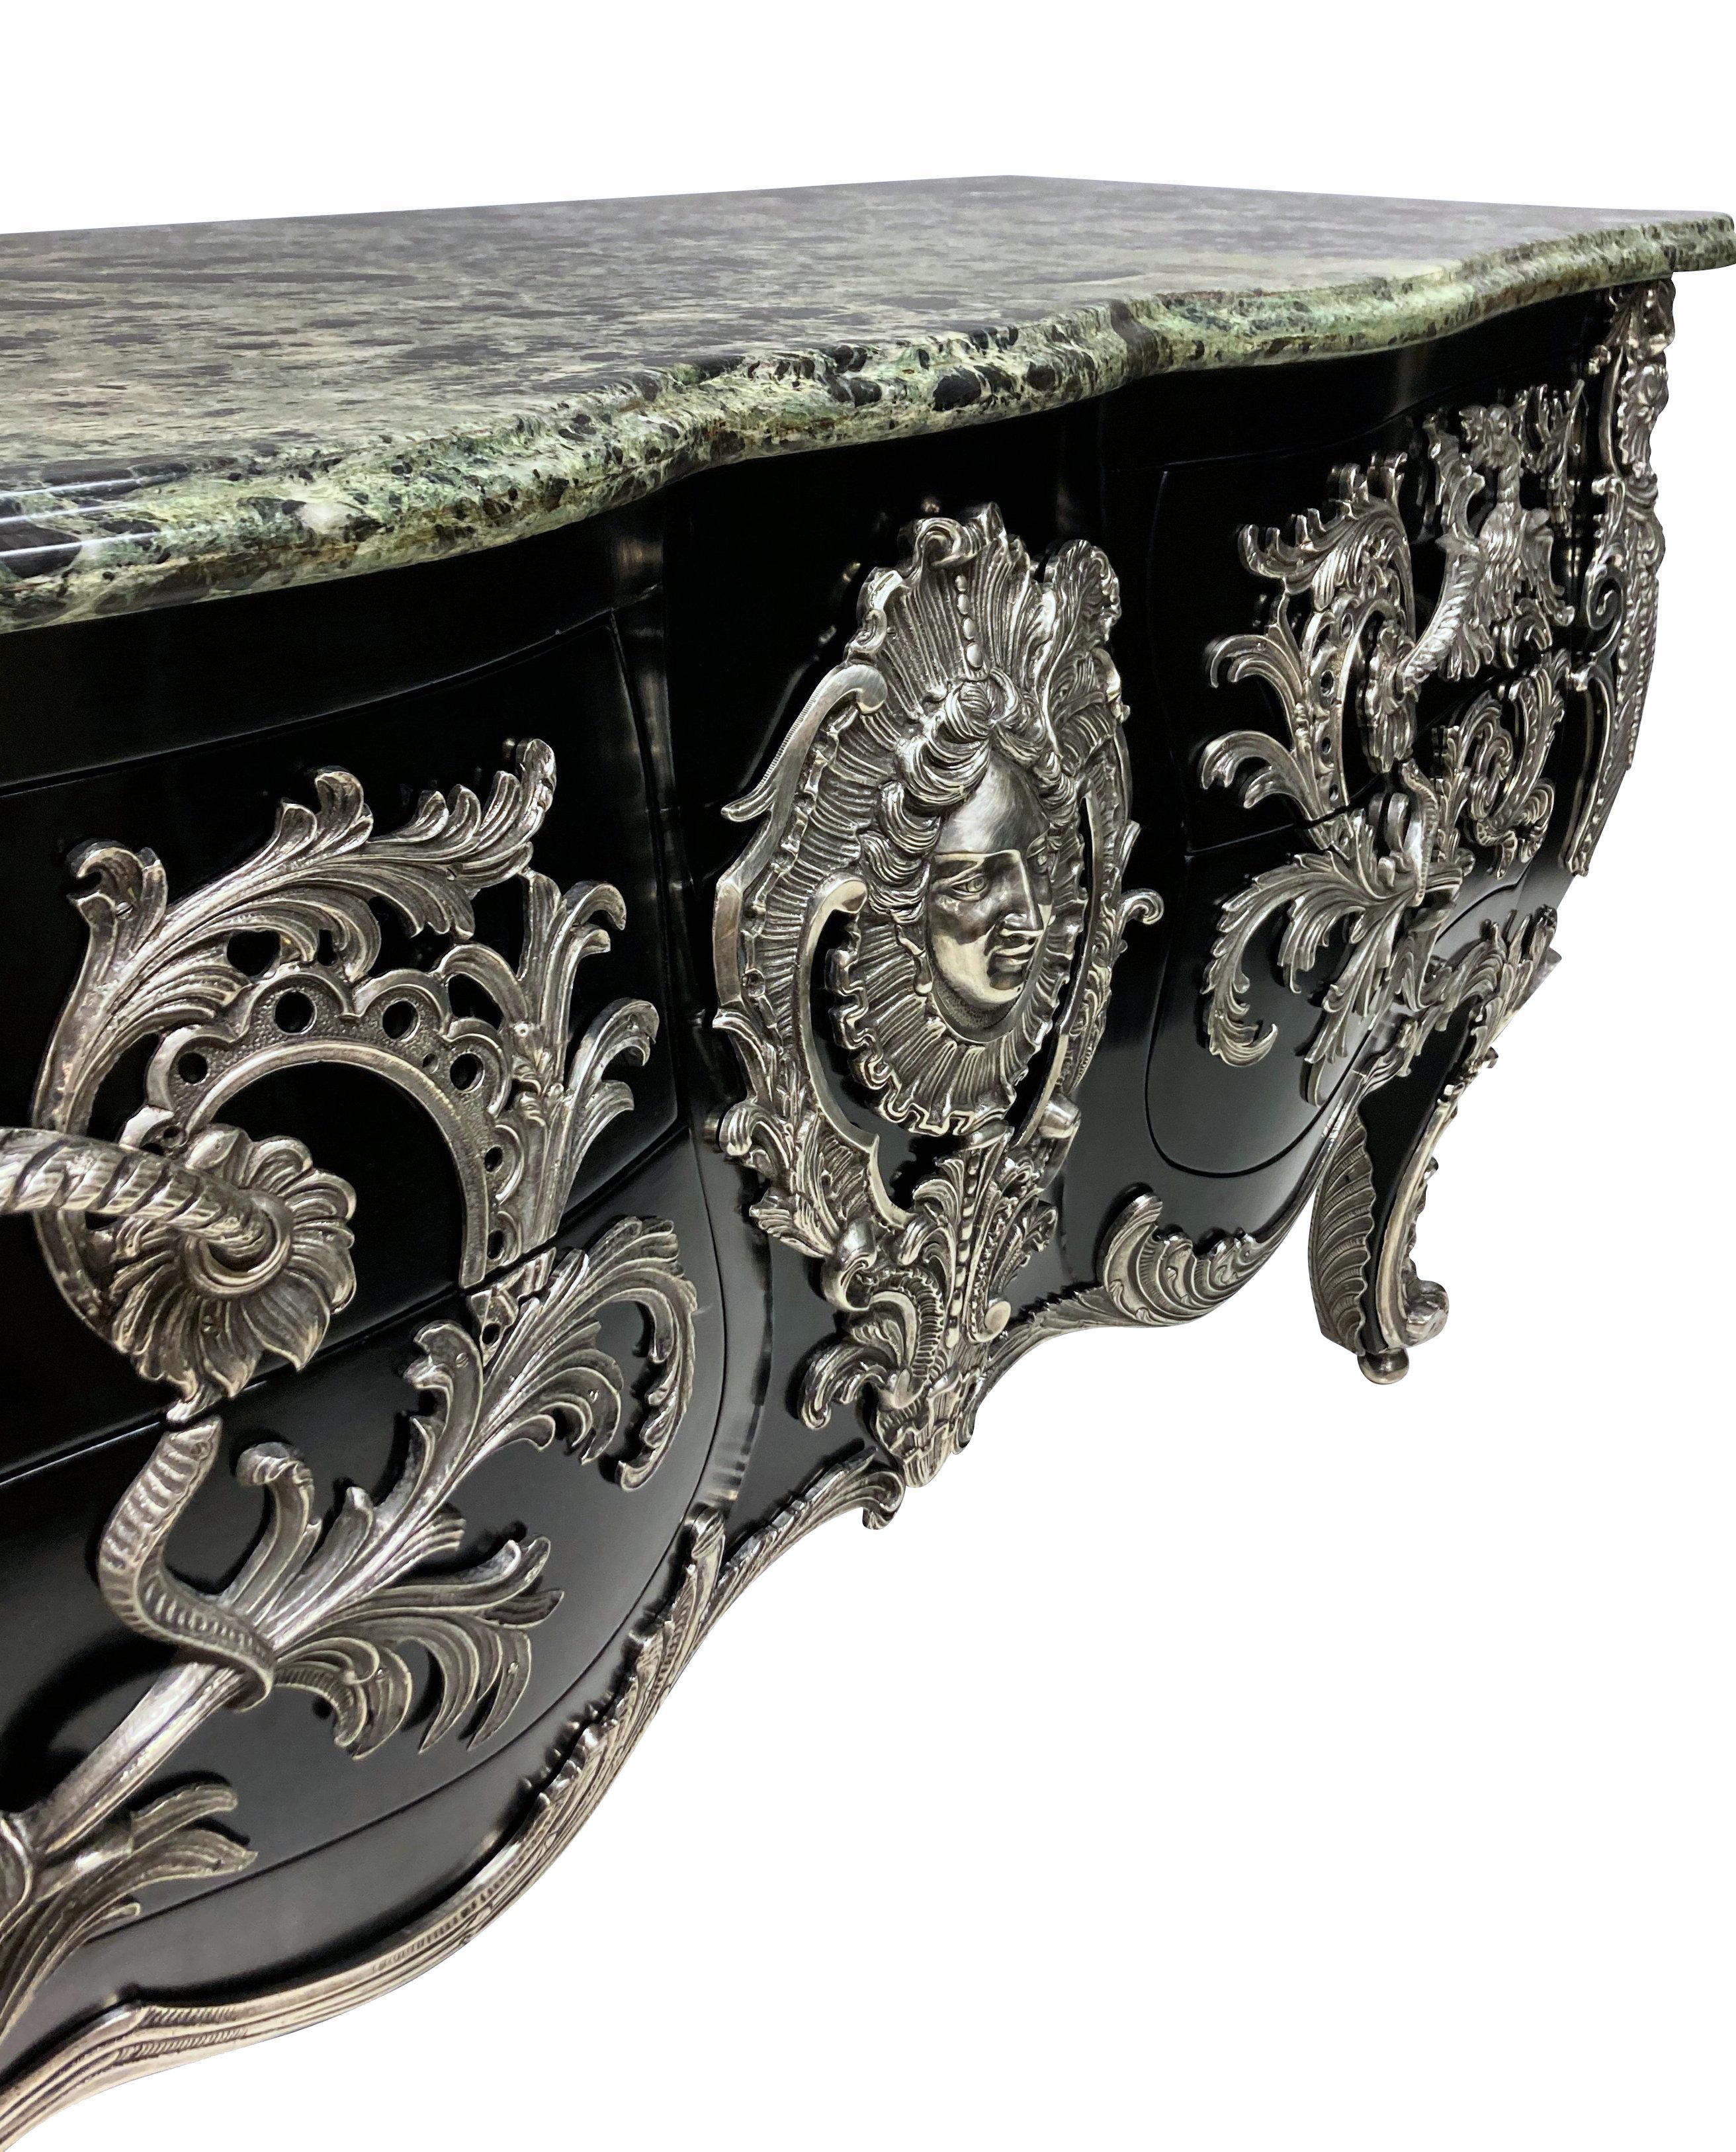 A monumental French commode a vantaux after the Model by Antoine-Robert Gaudreaux. The serpentine verde alpi marble top above a rocaille-framed Apollo mask and two pairs of serpentine drawers mounted with dragon and acanthus handles. The sides with